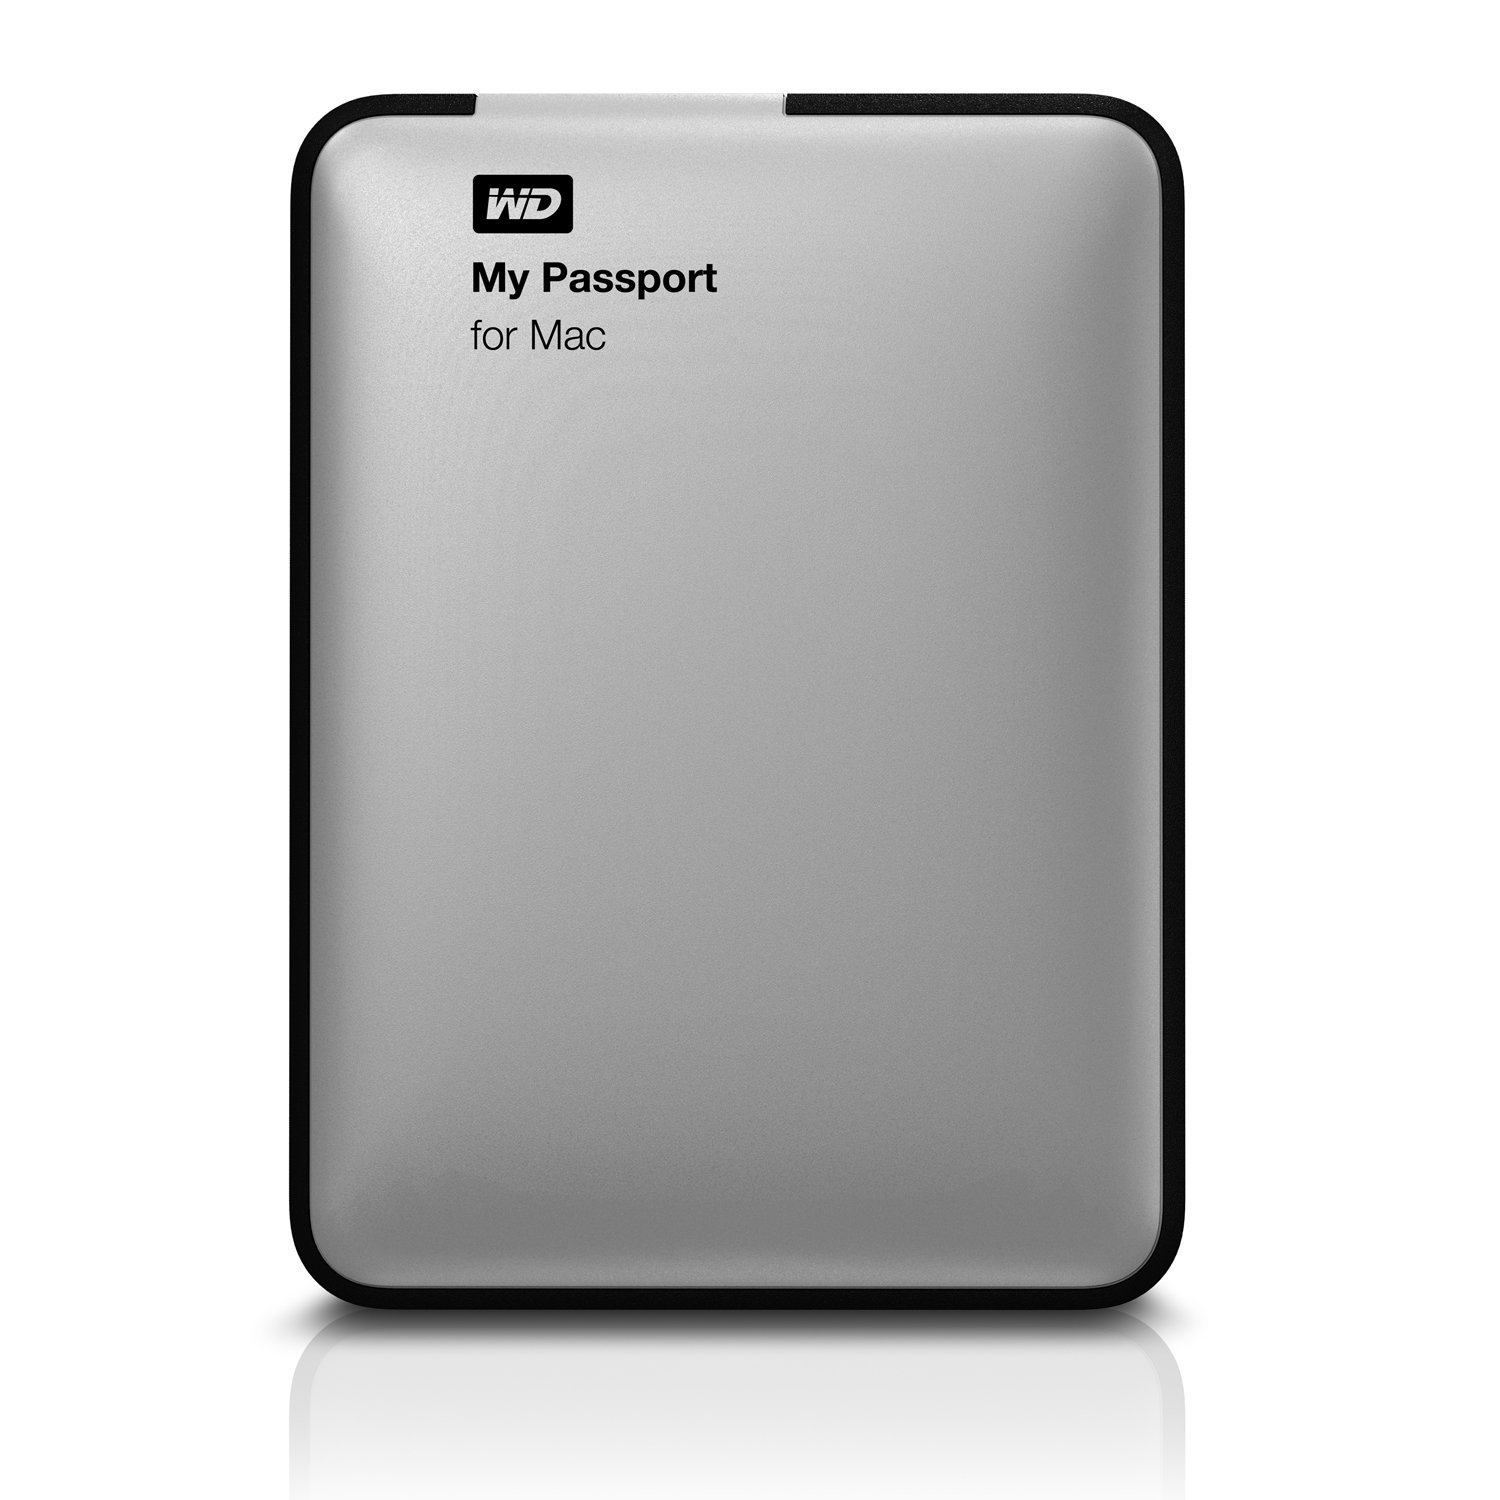 will my passport for mac work on linux